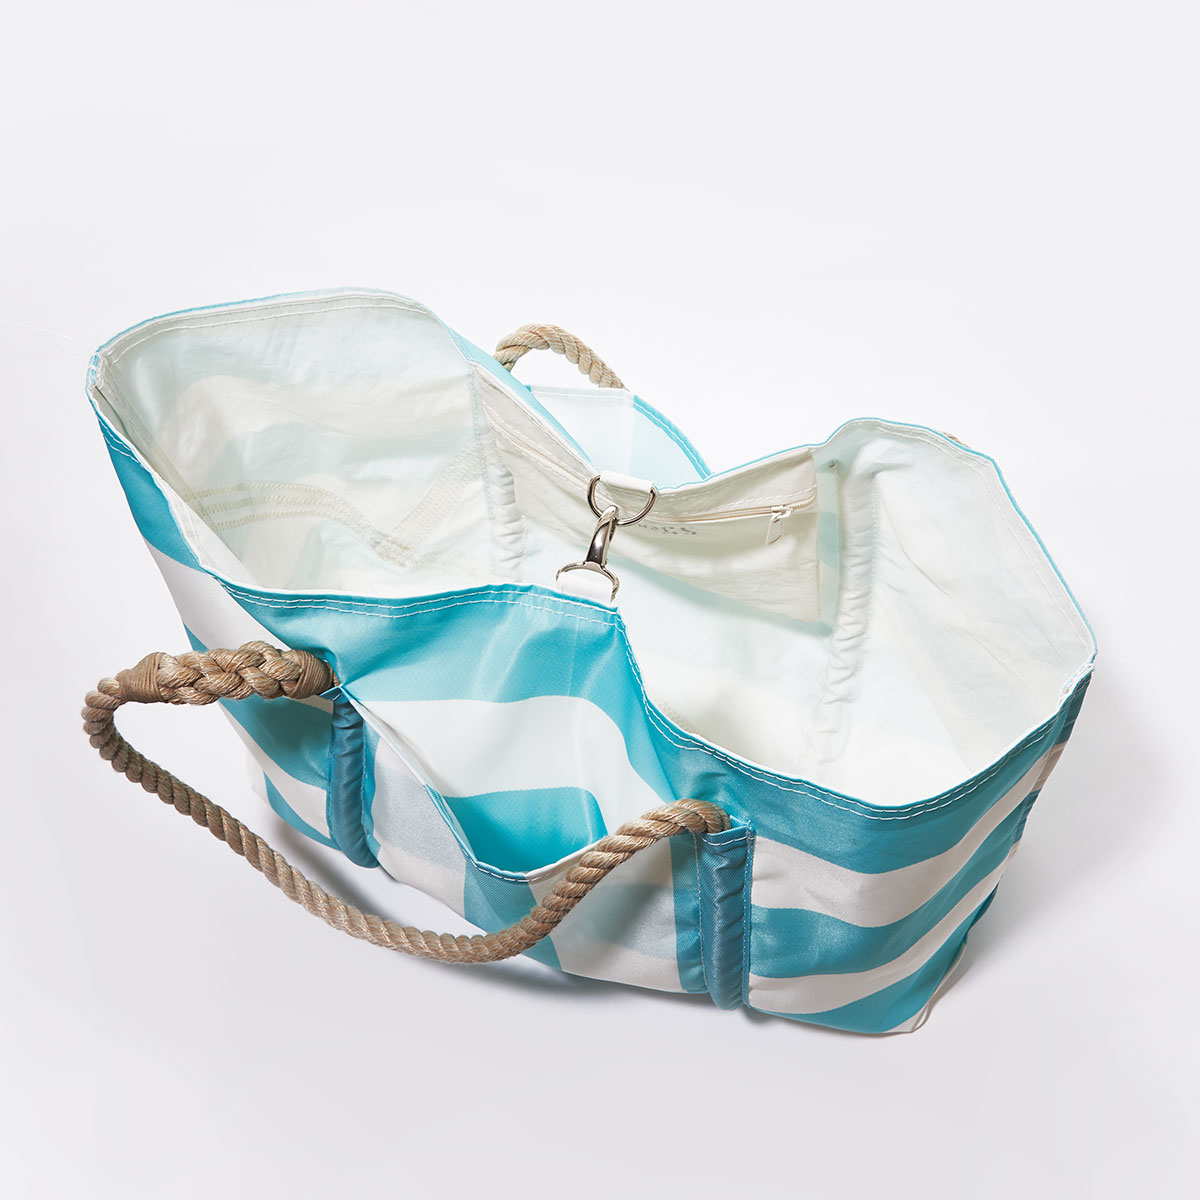 clasp closure: aquamarine and white plaid stripes adorn the front of a recycled sail cloth tote with hemp rope handles and a top metal clasp